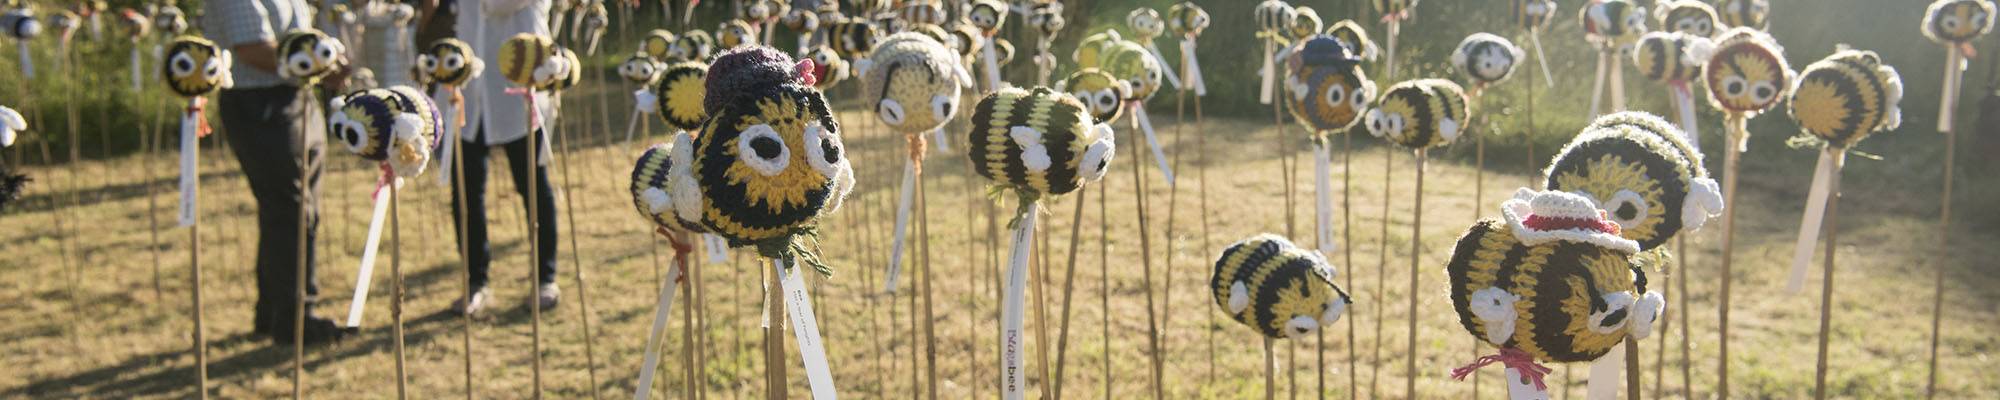 Knitted Bees in the Yeo Valley Organic Garden